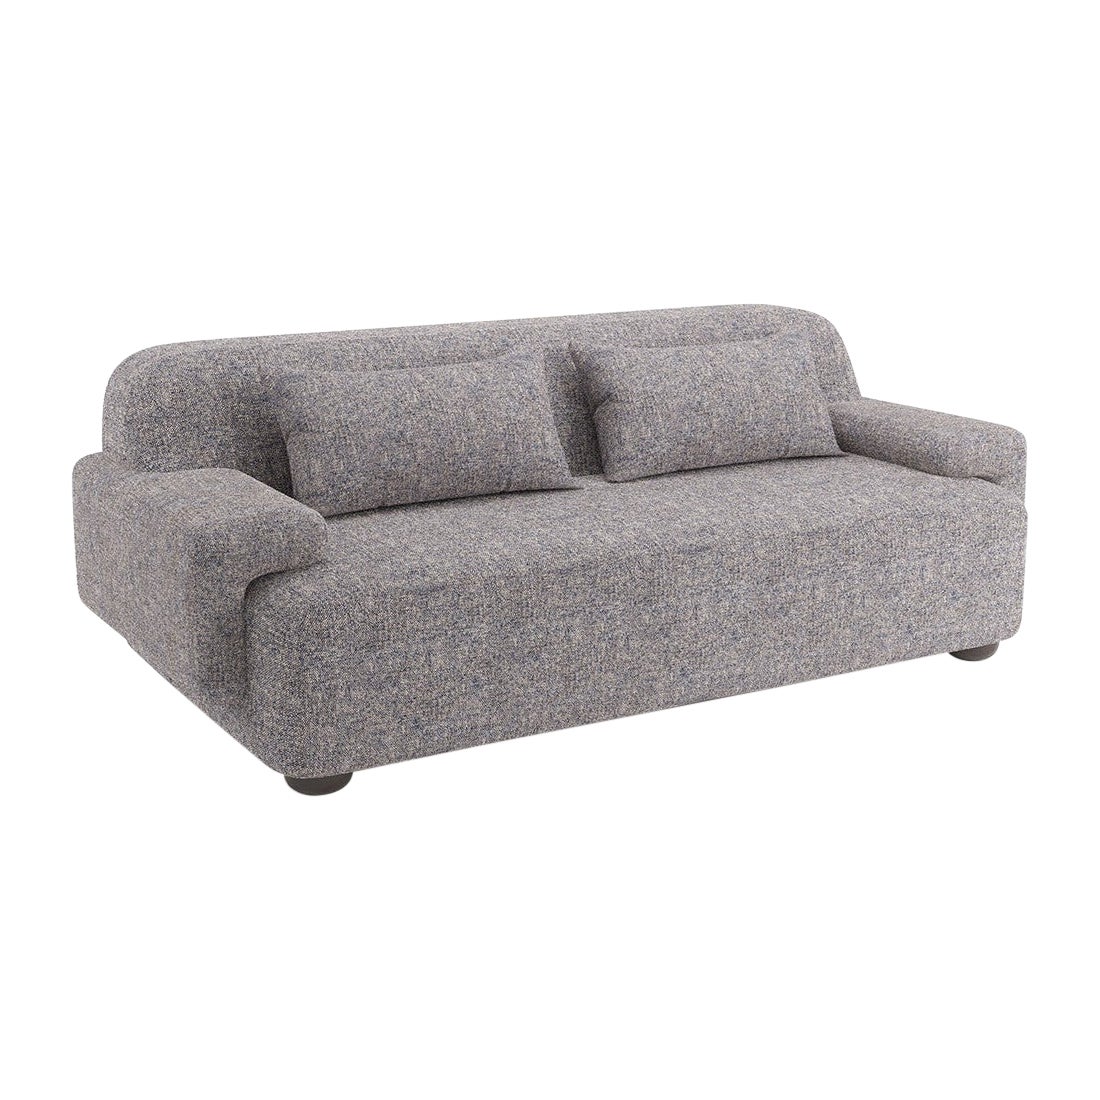 Popus Editions Lena 3 Seater Sofa in Marine London Linen Fabric For Sale